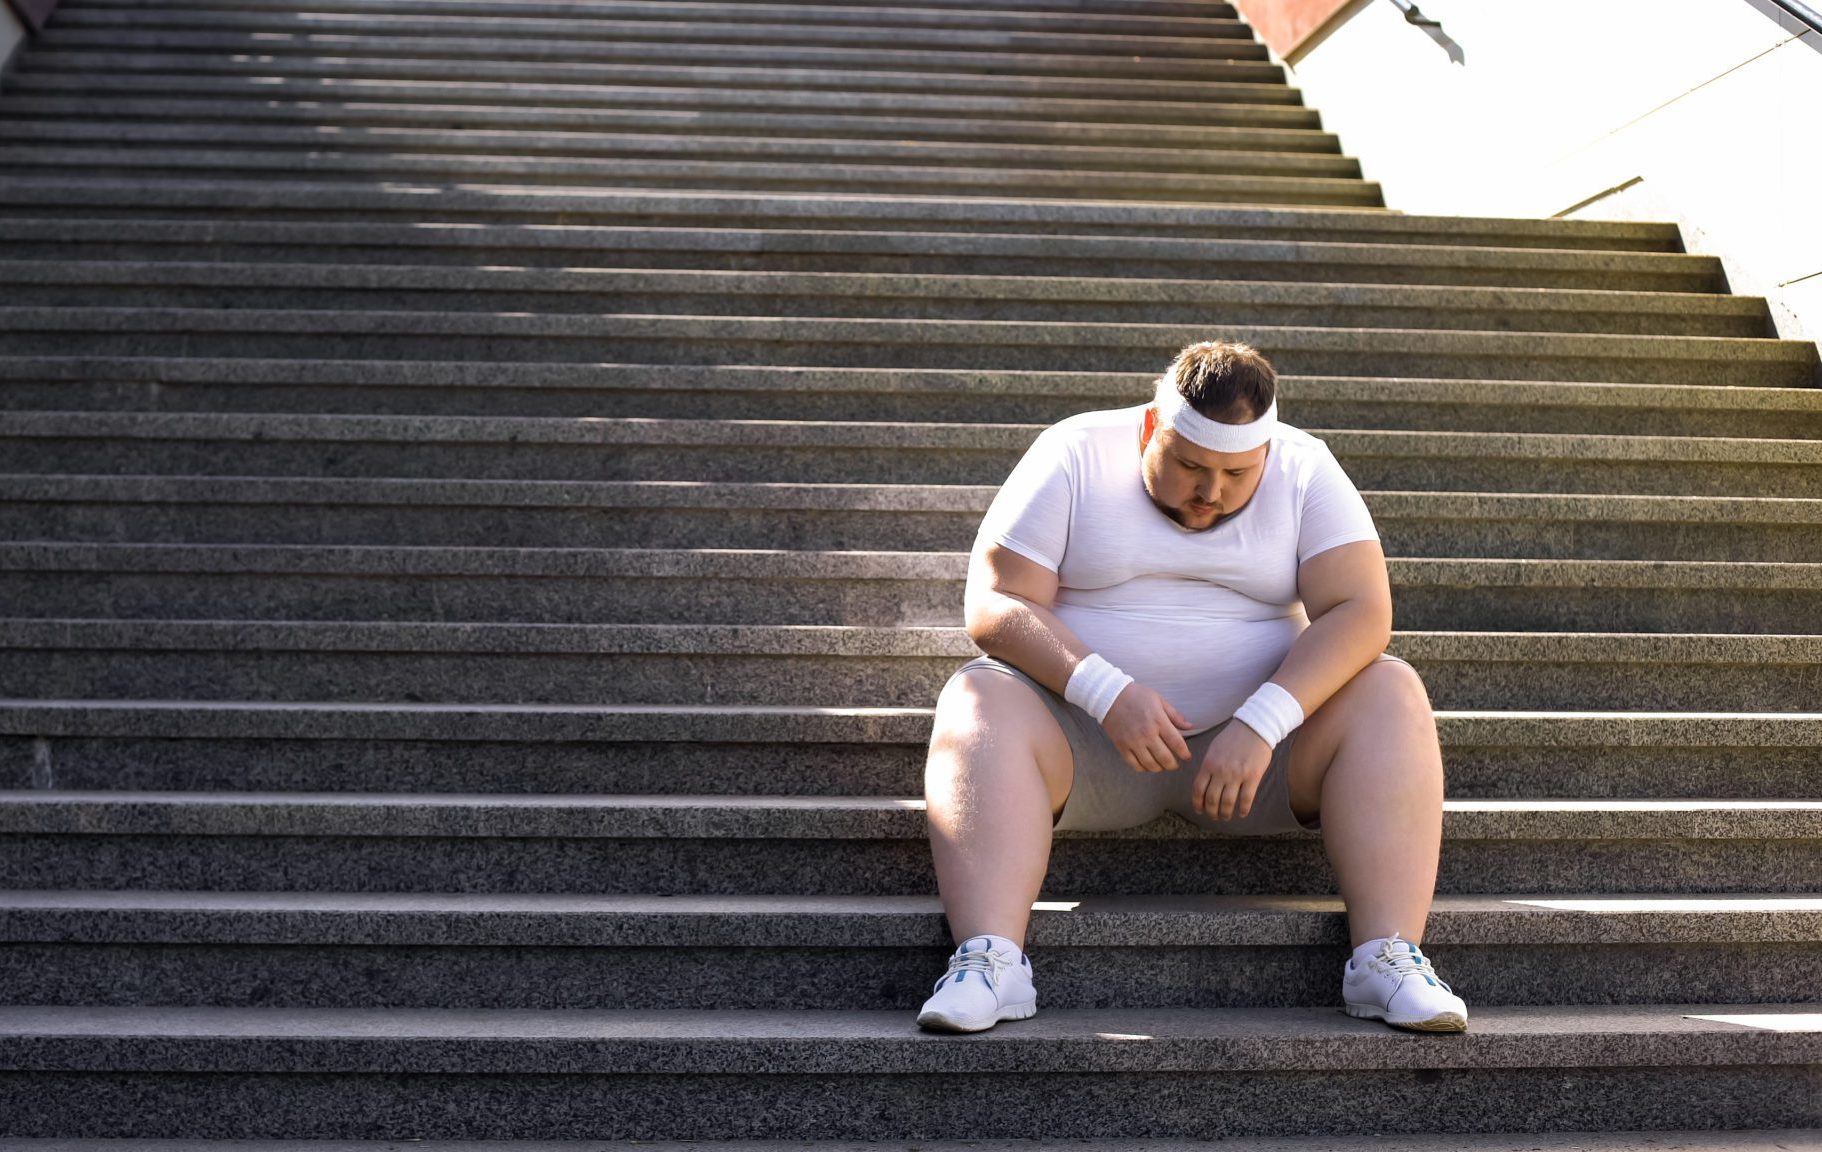 Fat,Man,Sitting,On,Stairs,After,Jogging,,No,Faith,In